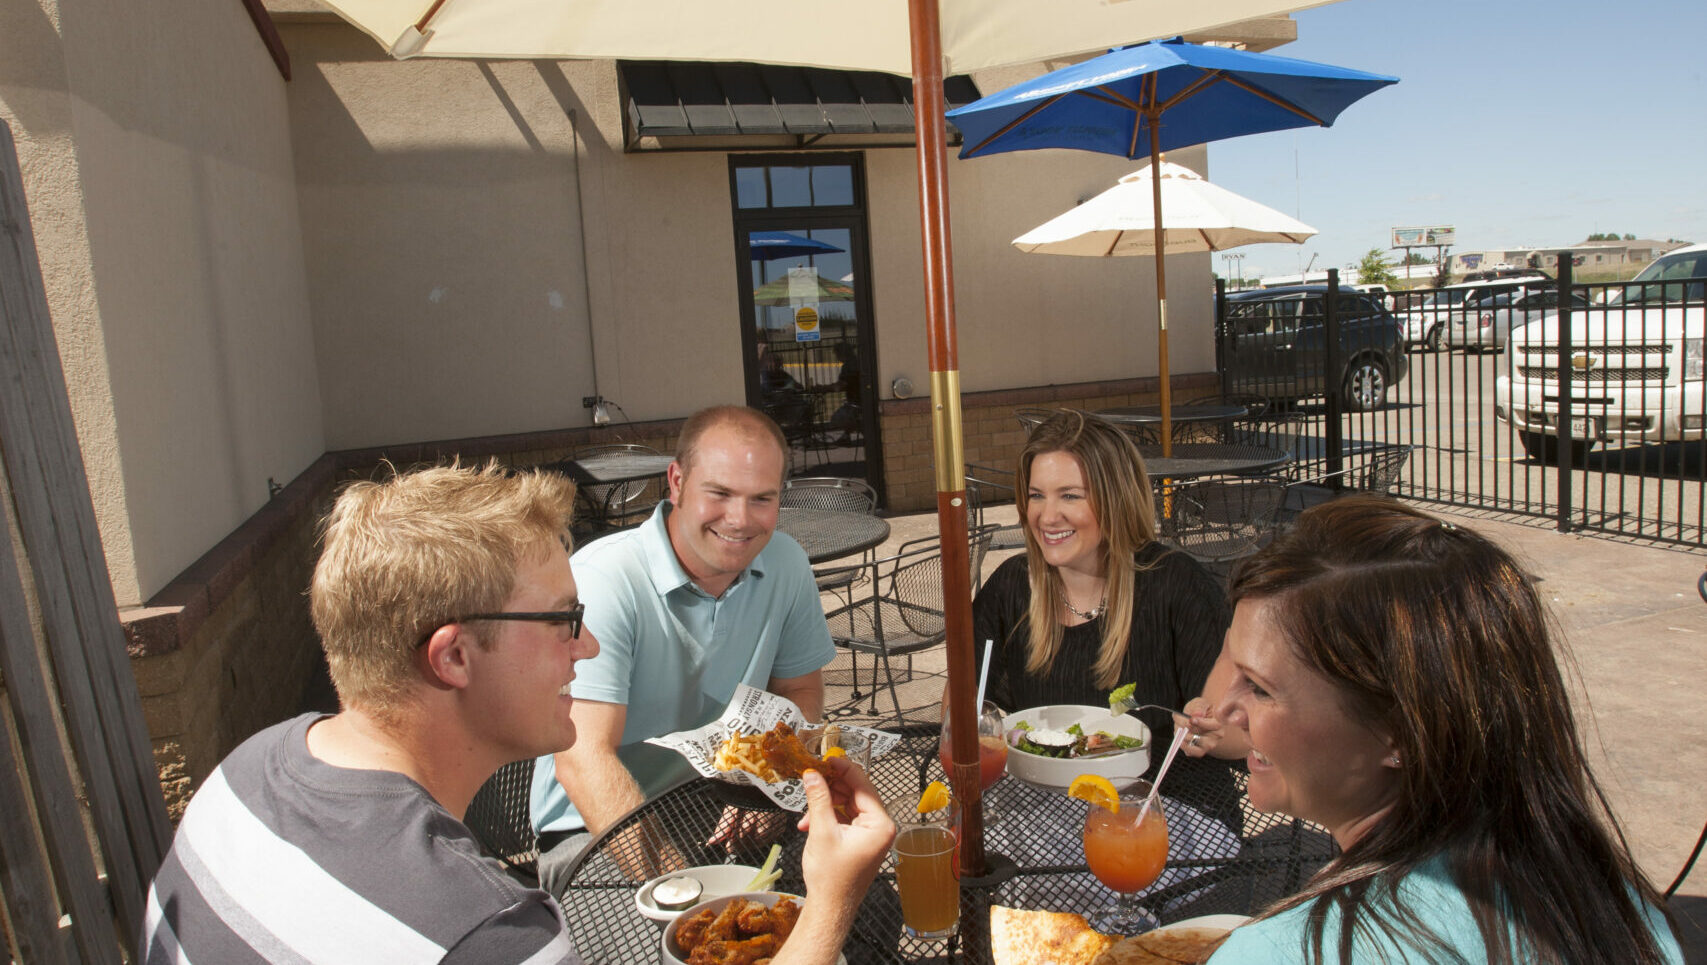 Buffalo Wings & Rings Outdoor Patio Dining Area